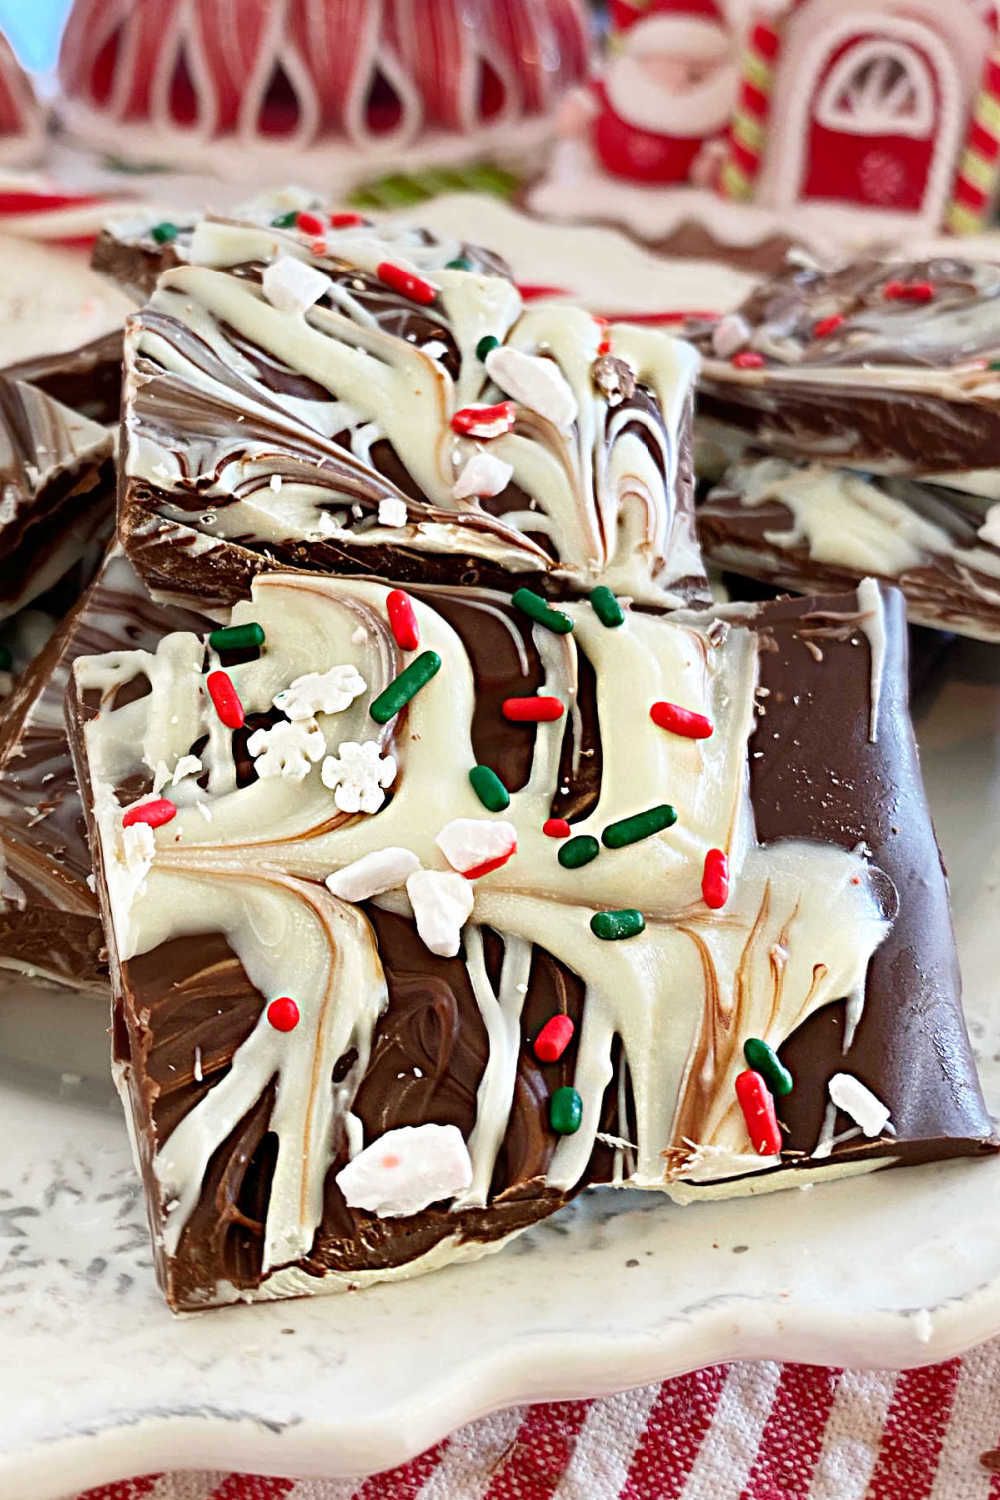 peppermint bark recipe made with swirled white chocolate and semisweet chocolate and peppermint candies on the table